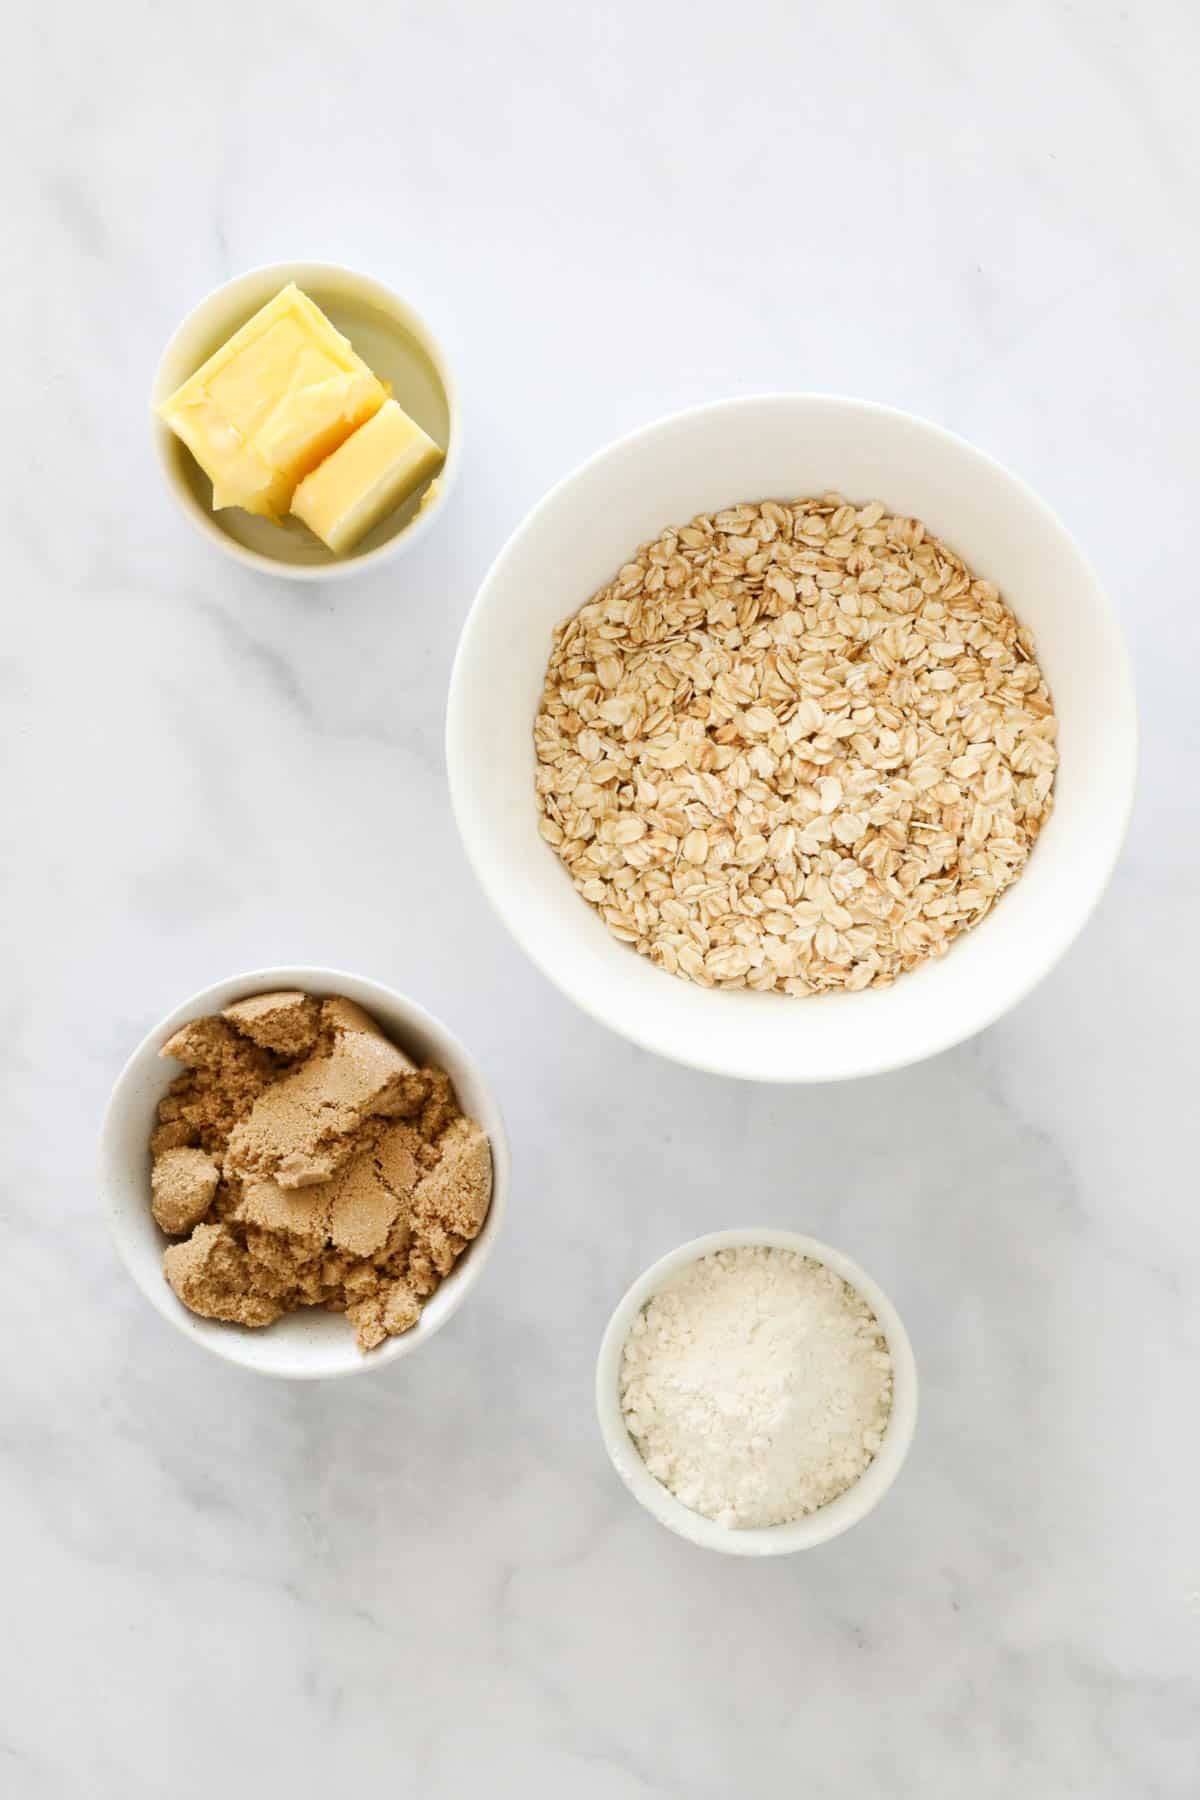 The ingredients for oat crumble.